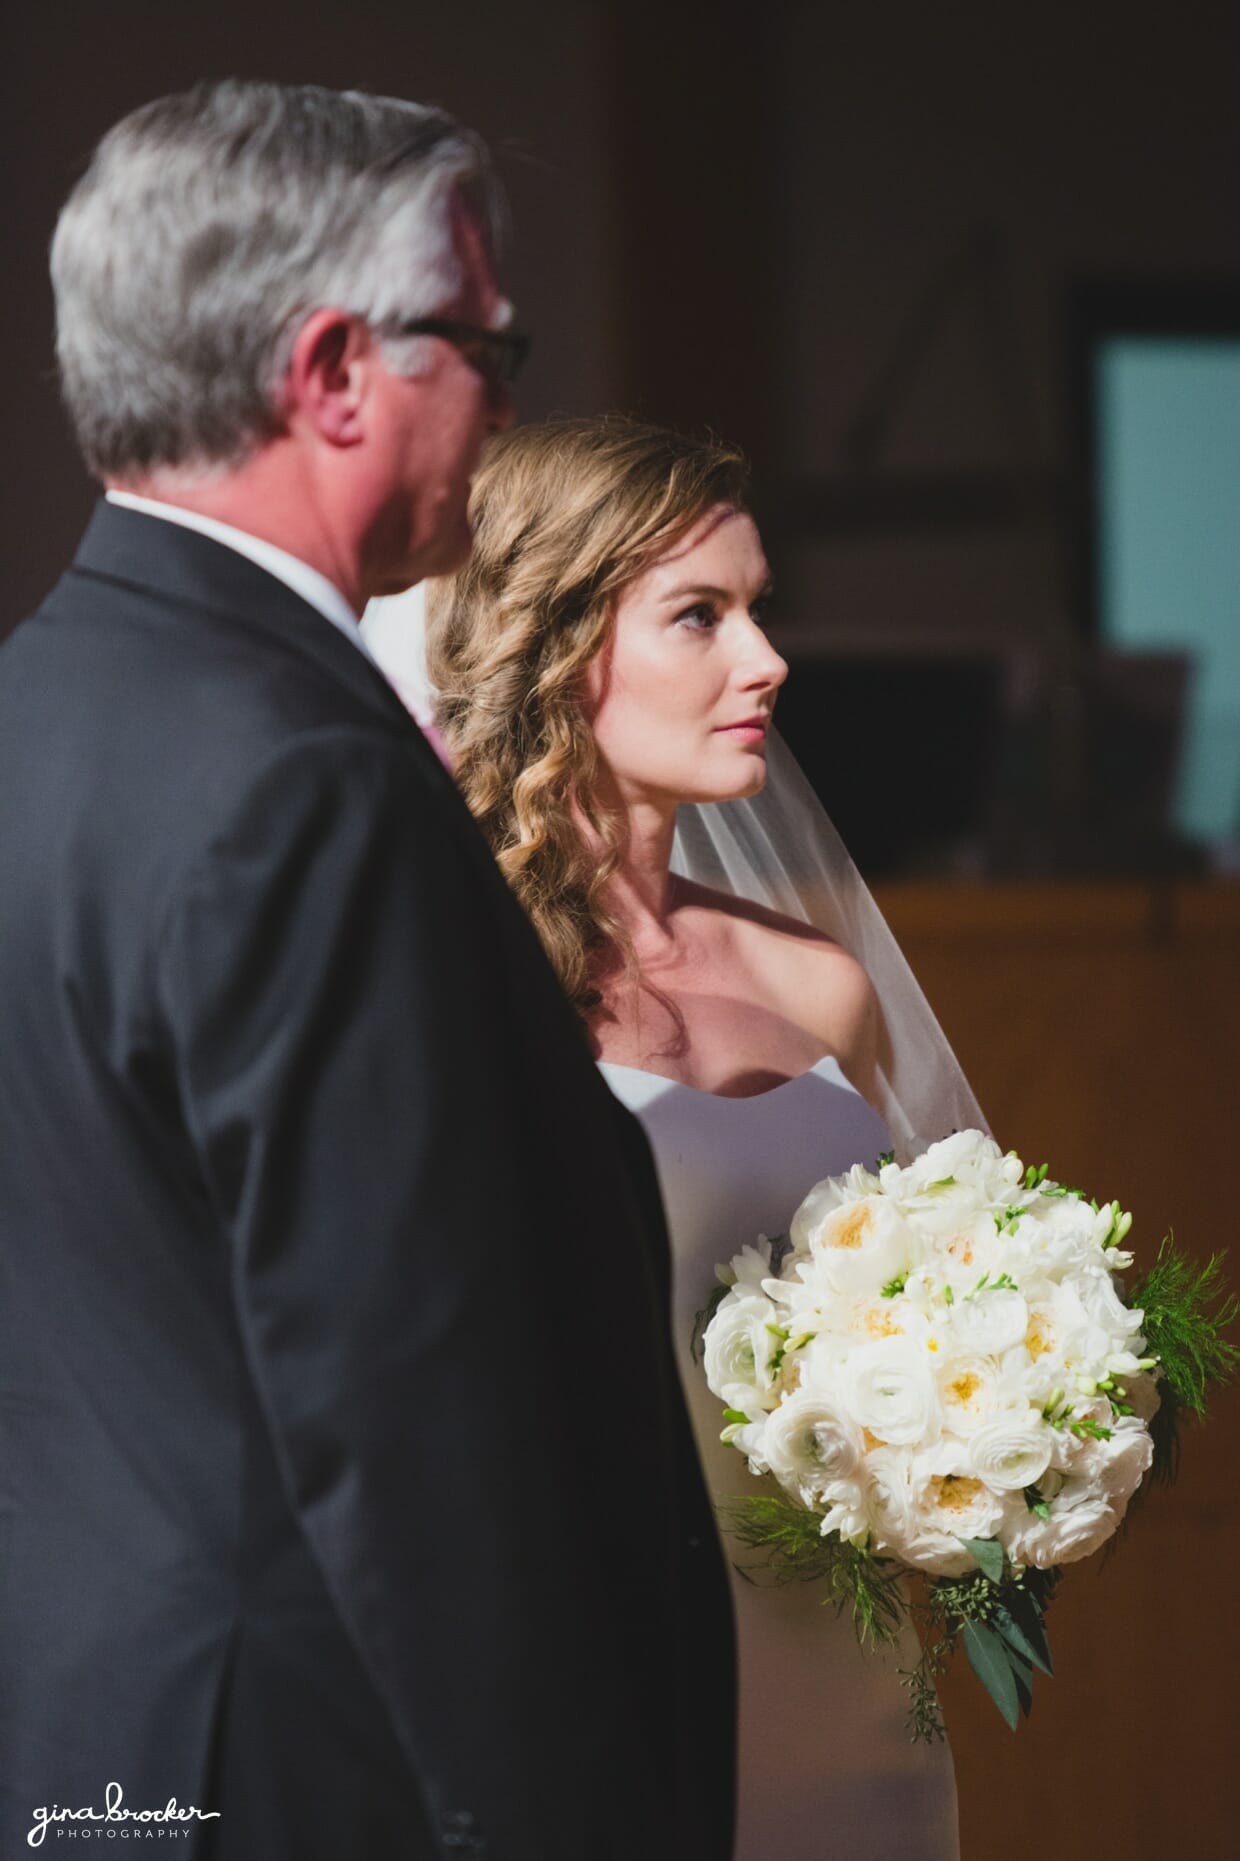 A bride stands next to her father as they approach the top of the aisle during a classic and elegant Boston wedding